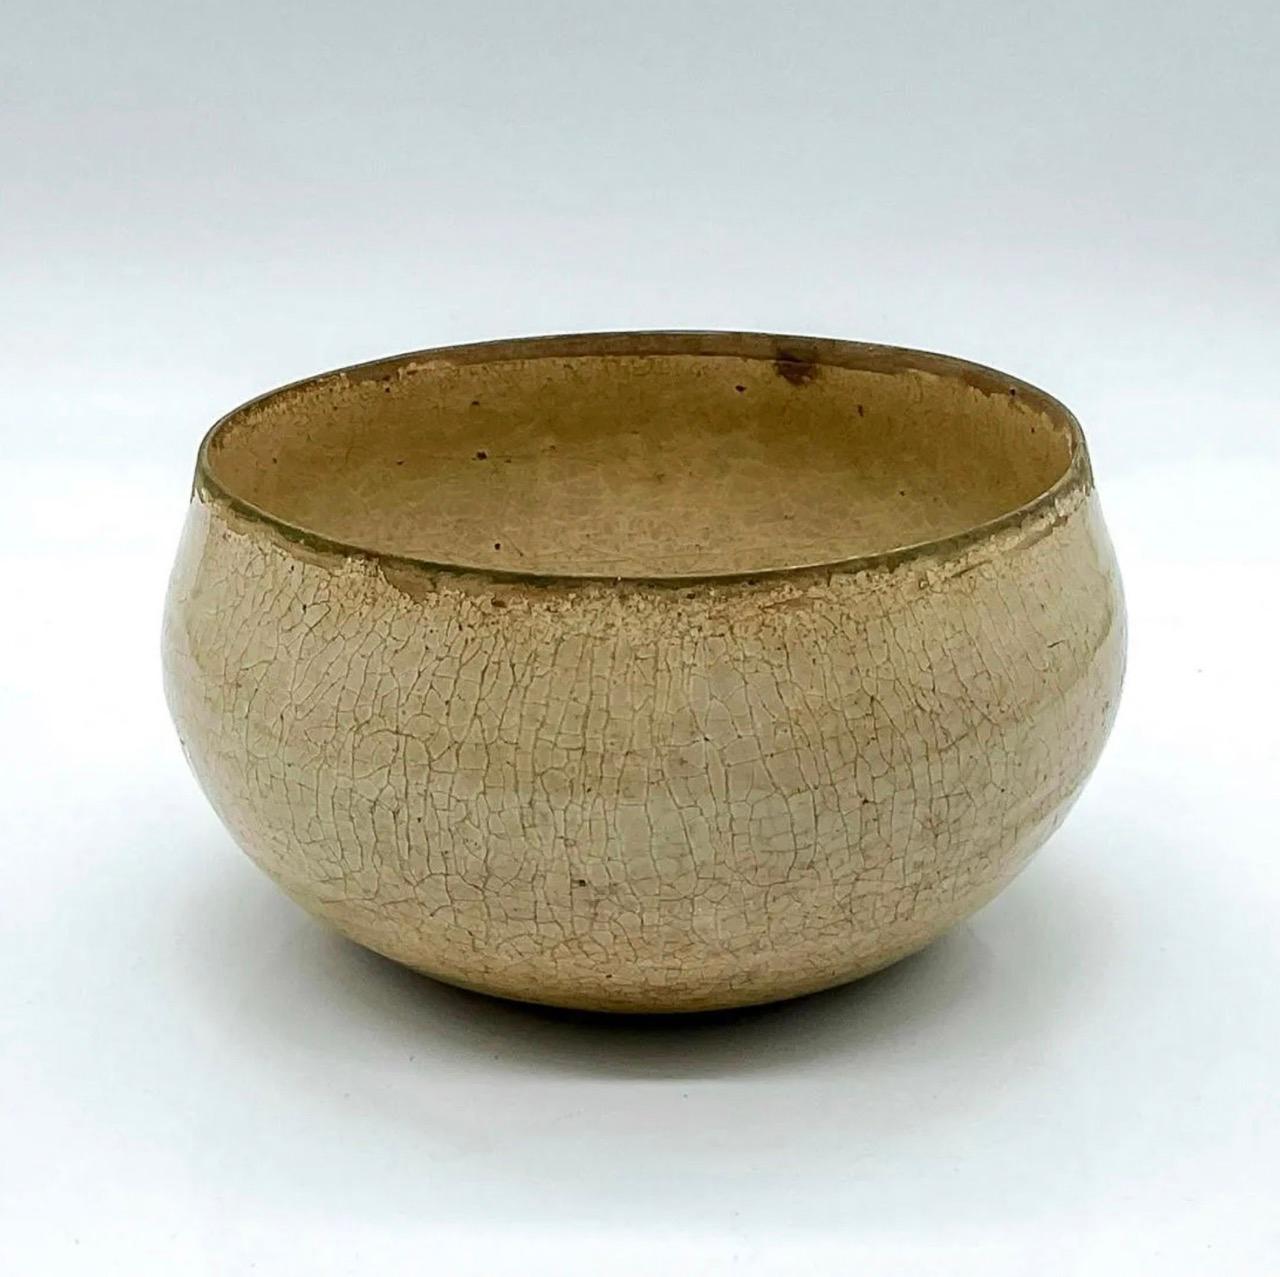 Antique Chinese ceramic Celadon bowl

Showing a beautiful patina, this bowl is an excellent version of an early Celadon bowl. 

Likely from the Eastern Han Dynasty period (25-220).

The term ‘celadon ware’, also known as green ware, refers to